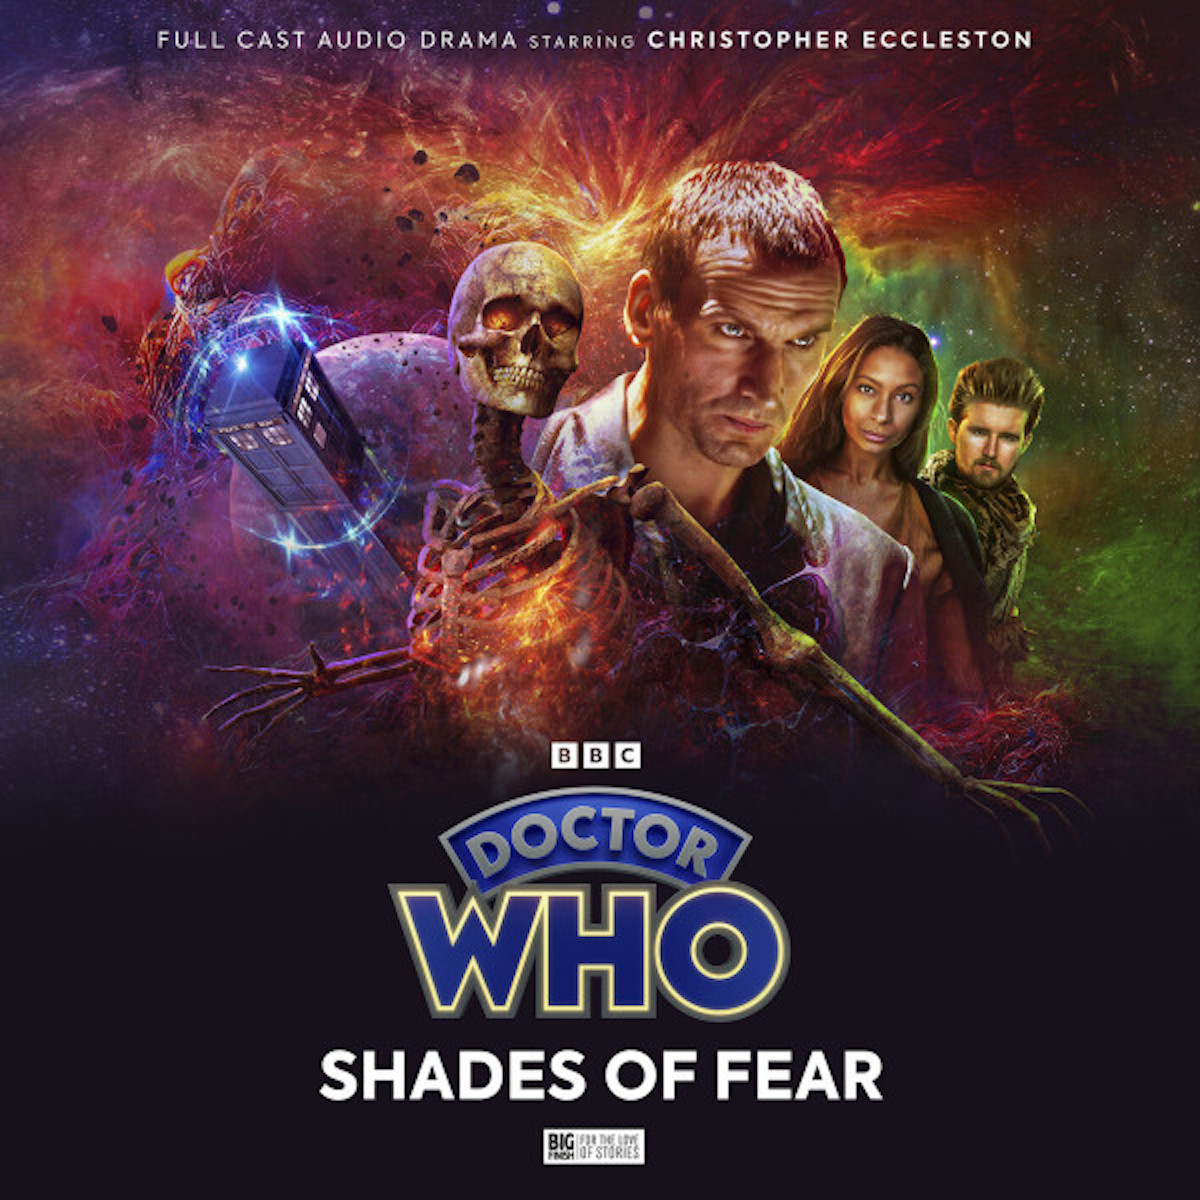 The Ninth Doctor Adventures Shades of Fear Vinyl